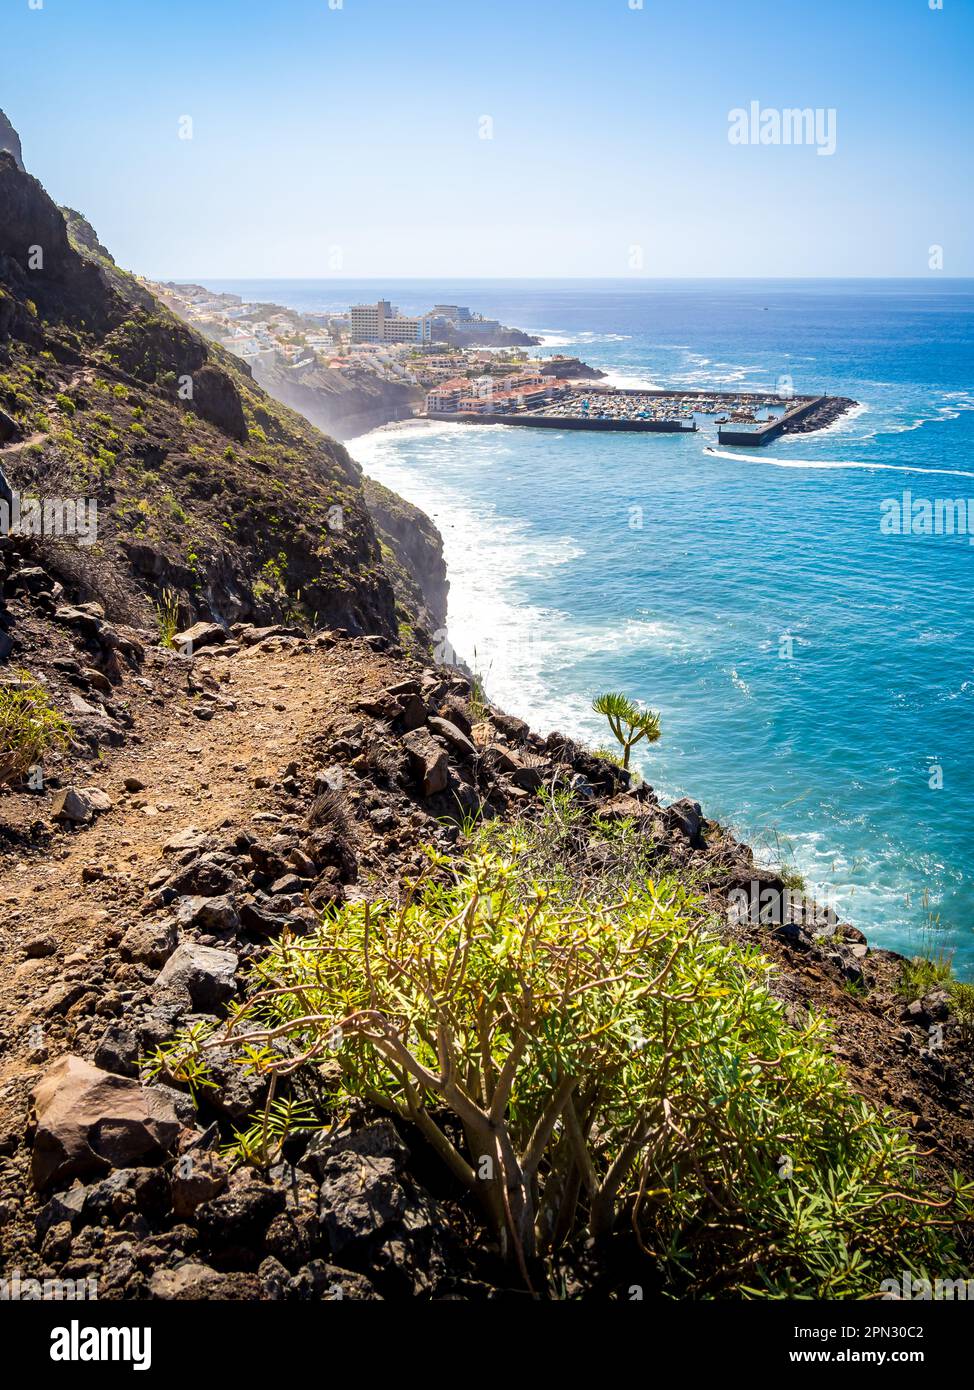 Capture the thrill as a narrow and perilous trail winds along the towering Acantilados de Los Gigantes cliffs. Stock Photo